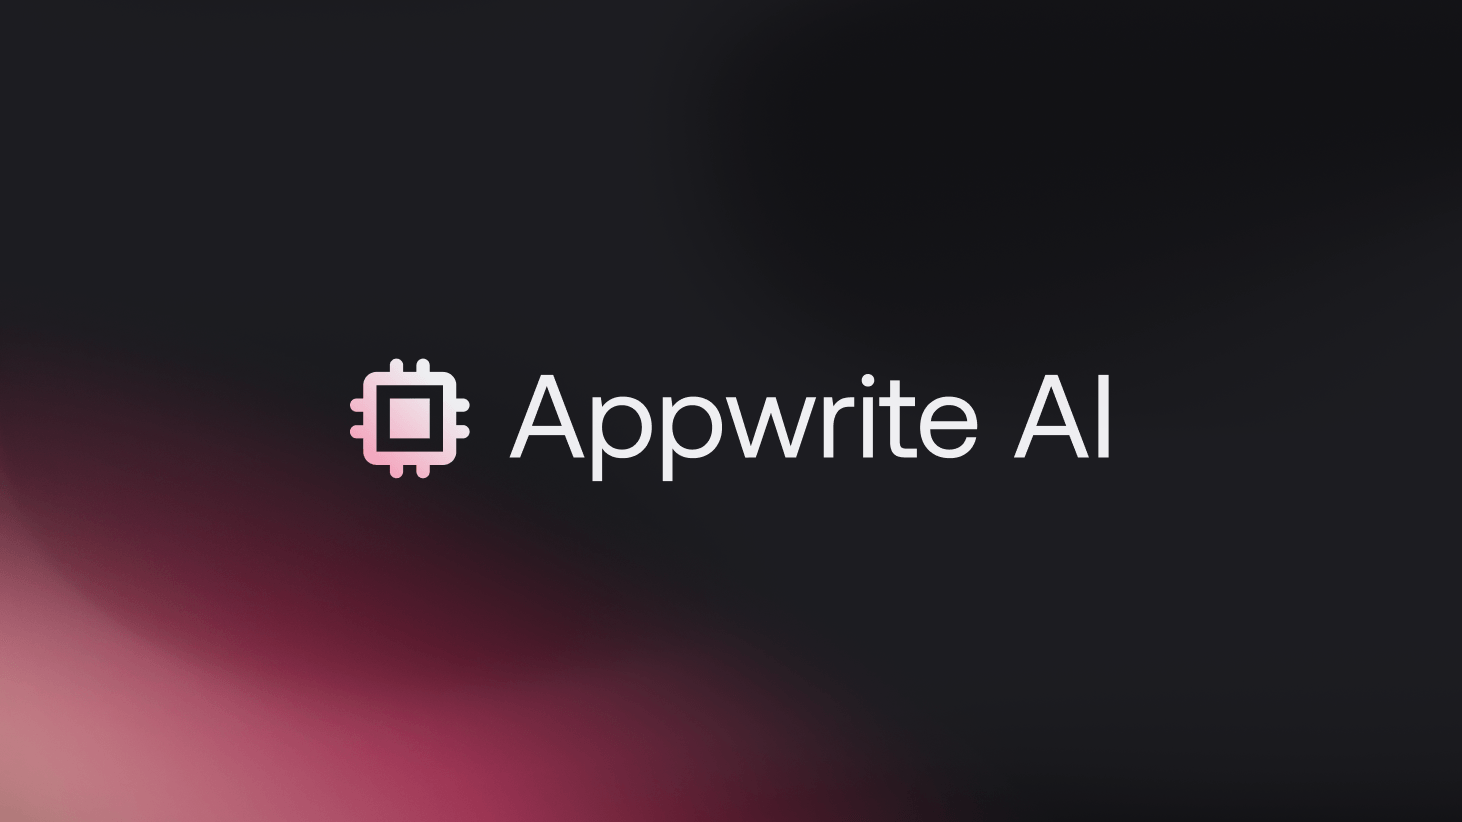 Announcing new Appwrite AI integrations